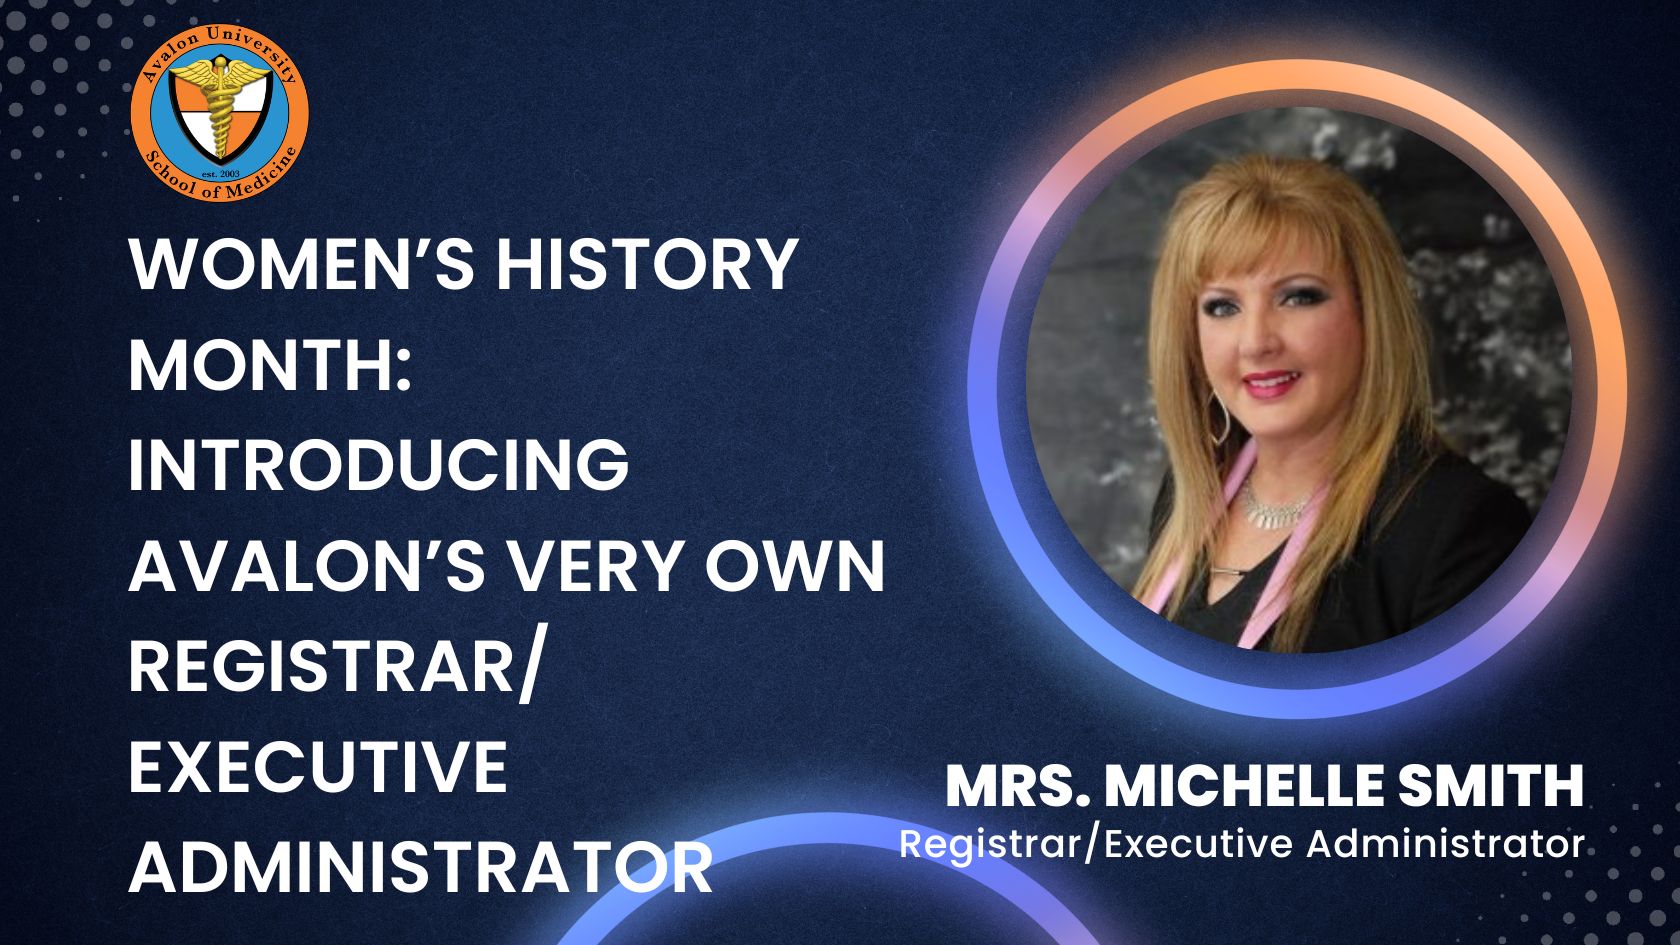 Women’s History Month Introducing Avalon’s Very Own Registrar Executive Administrator